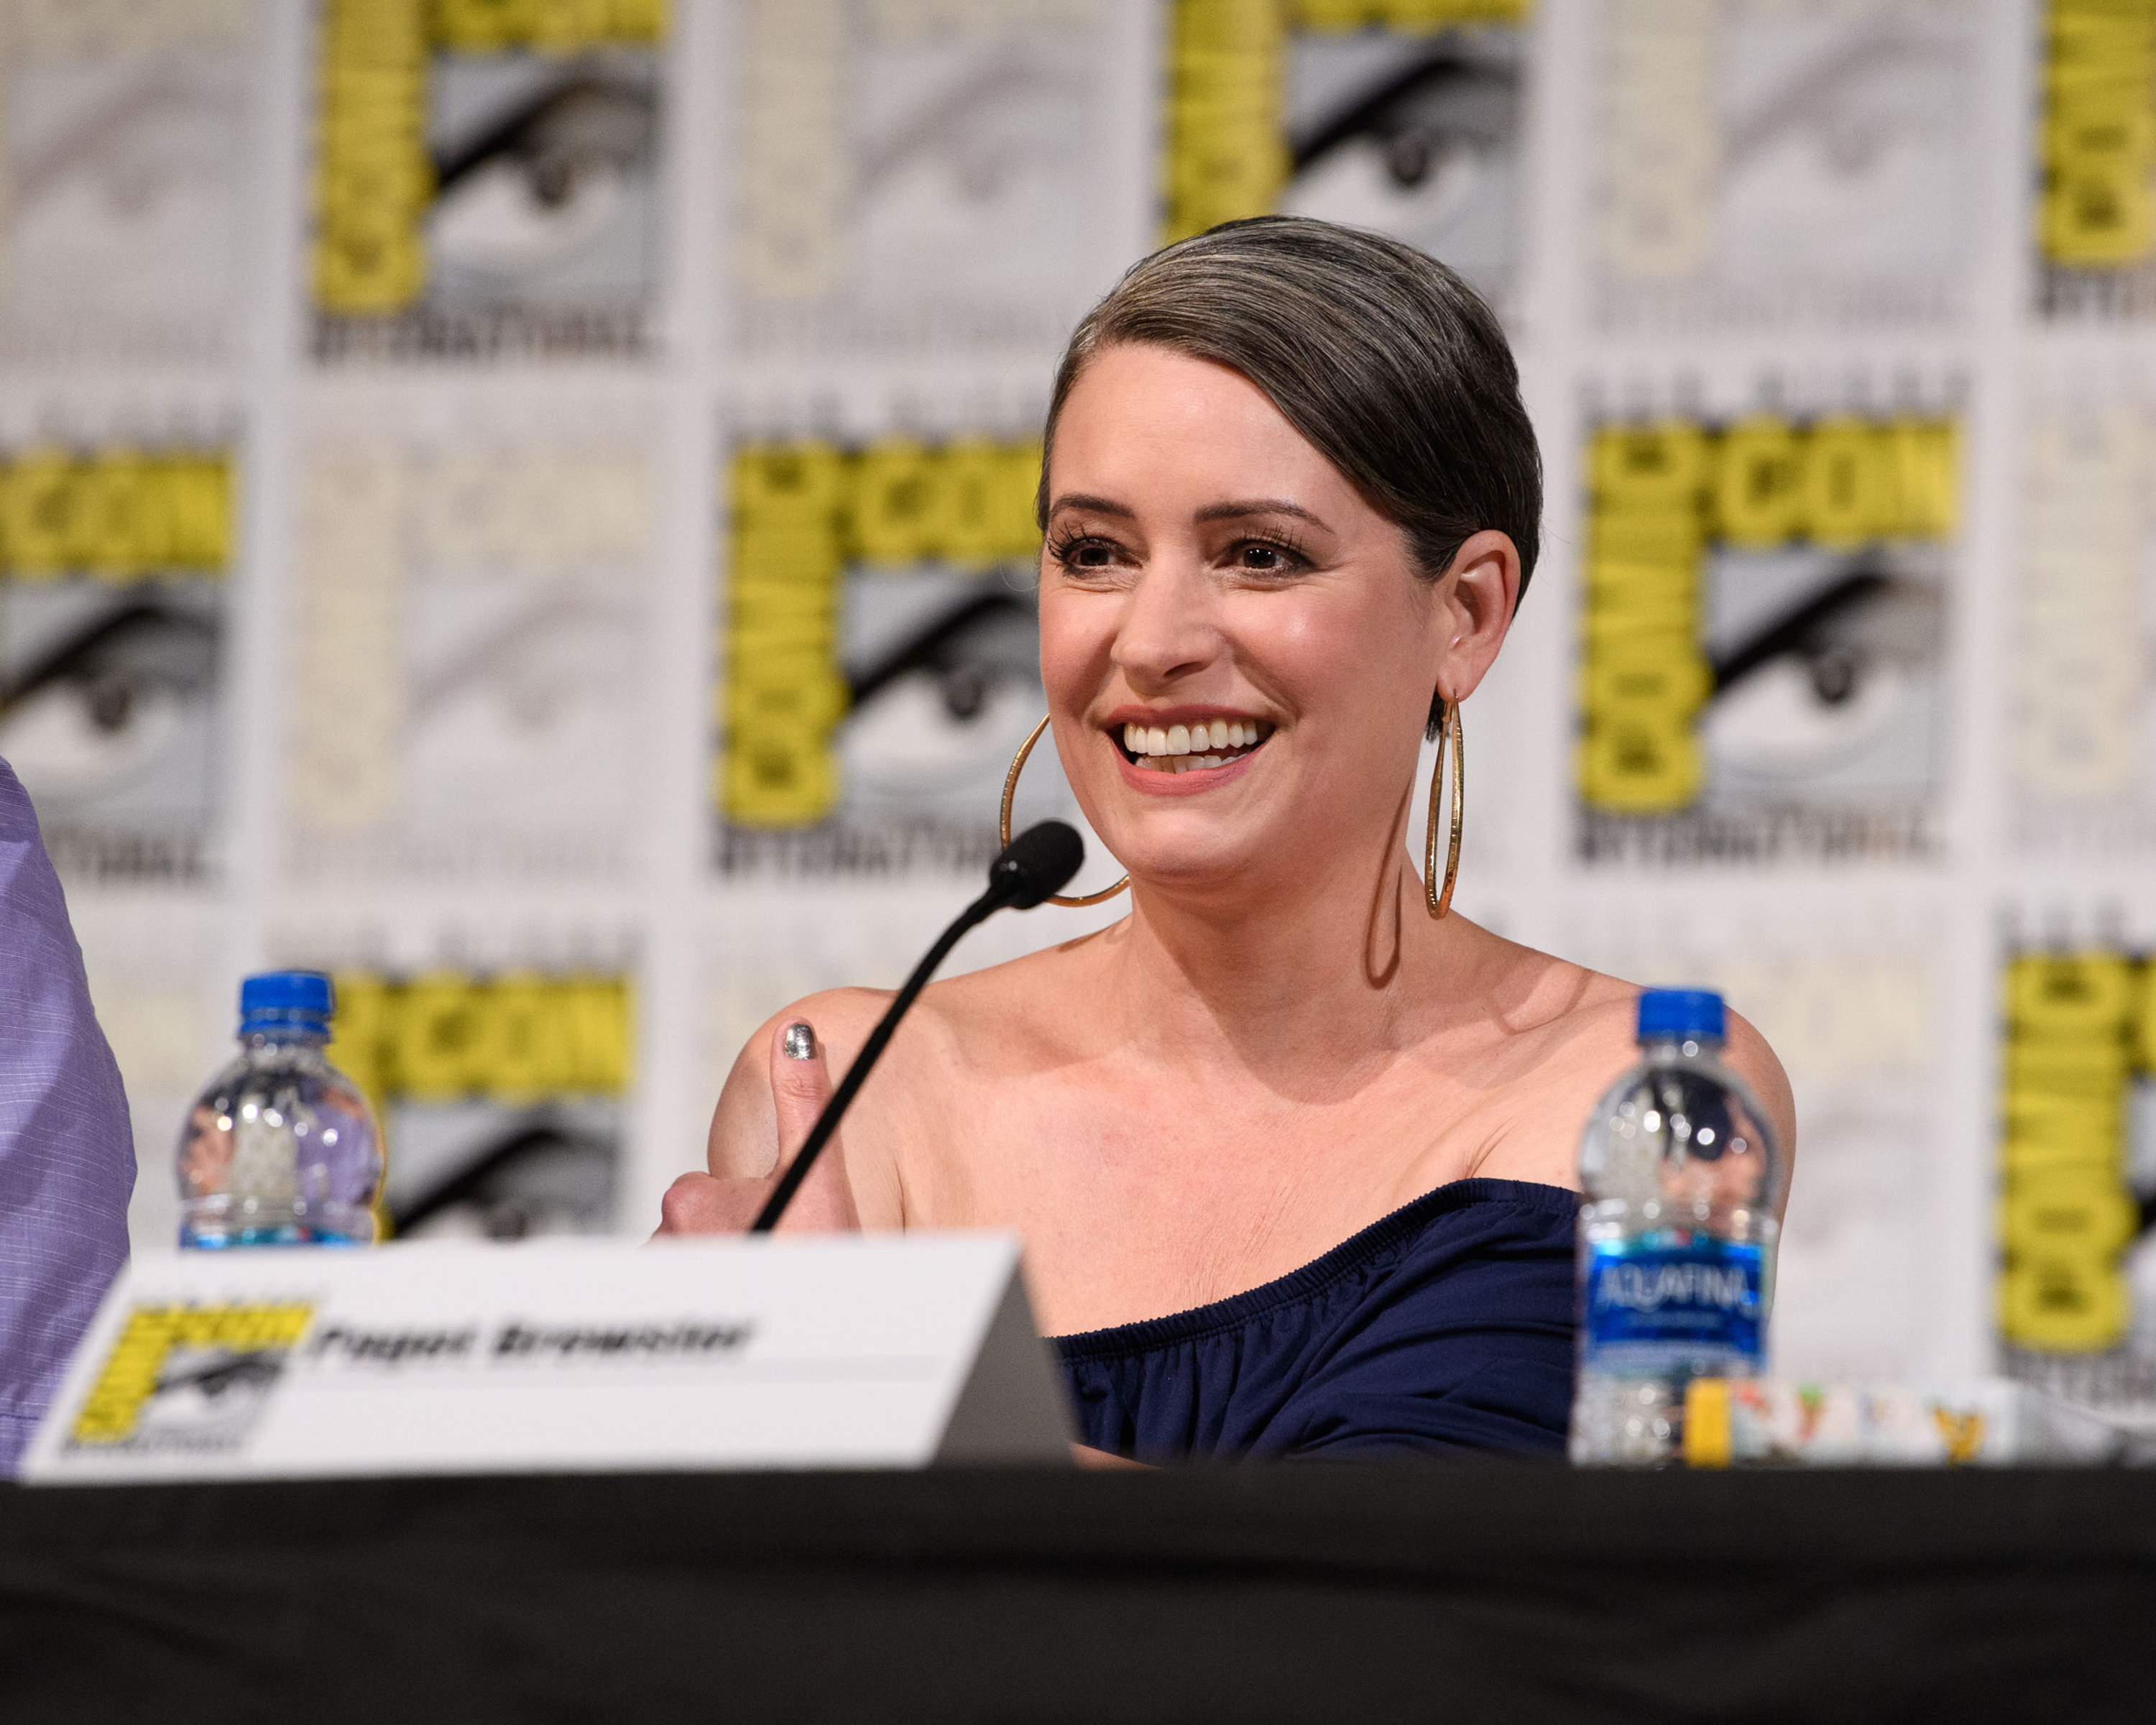 Paget Brewster at Comic-Con on Friday, July 19, 2019, in San Diego. | Source: Getty Images